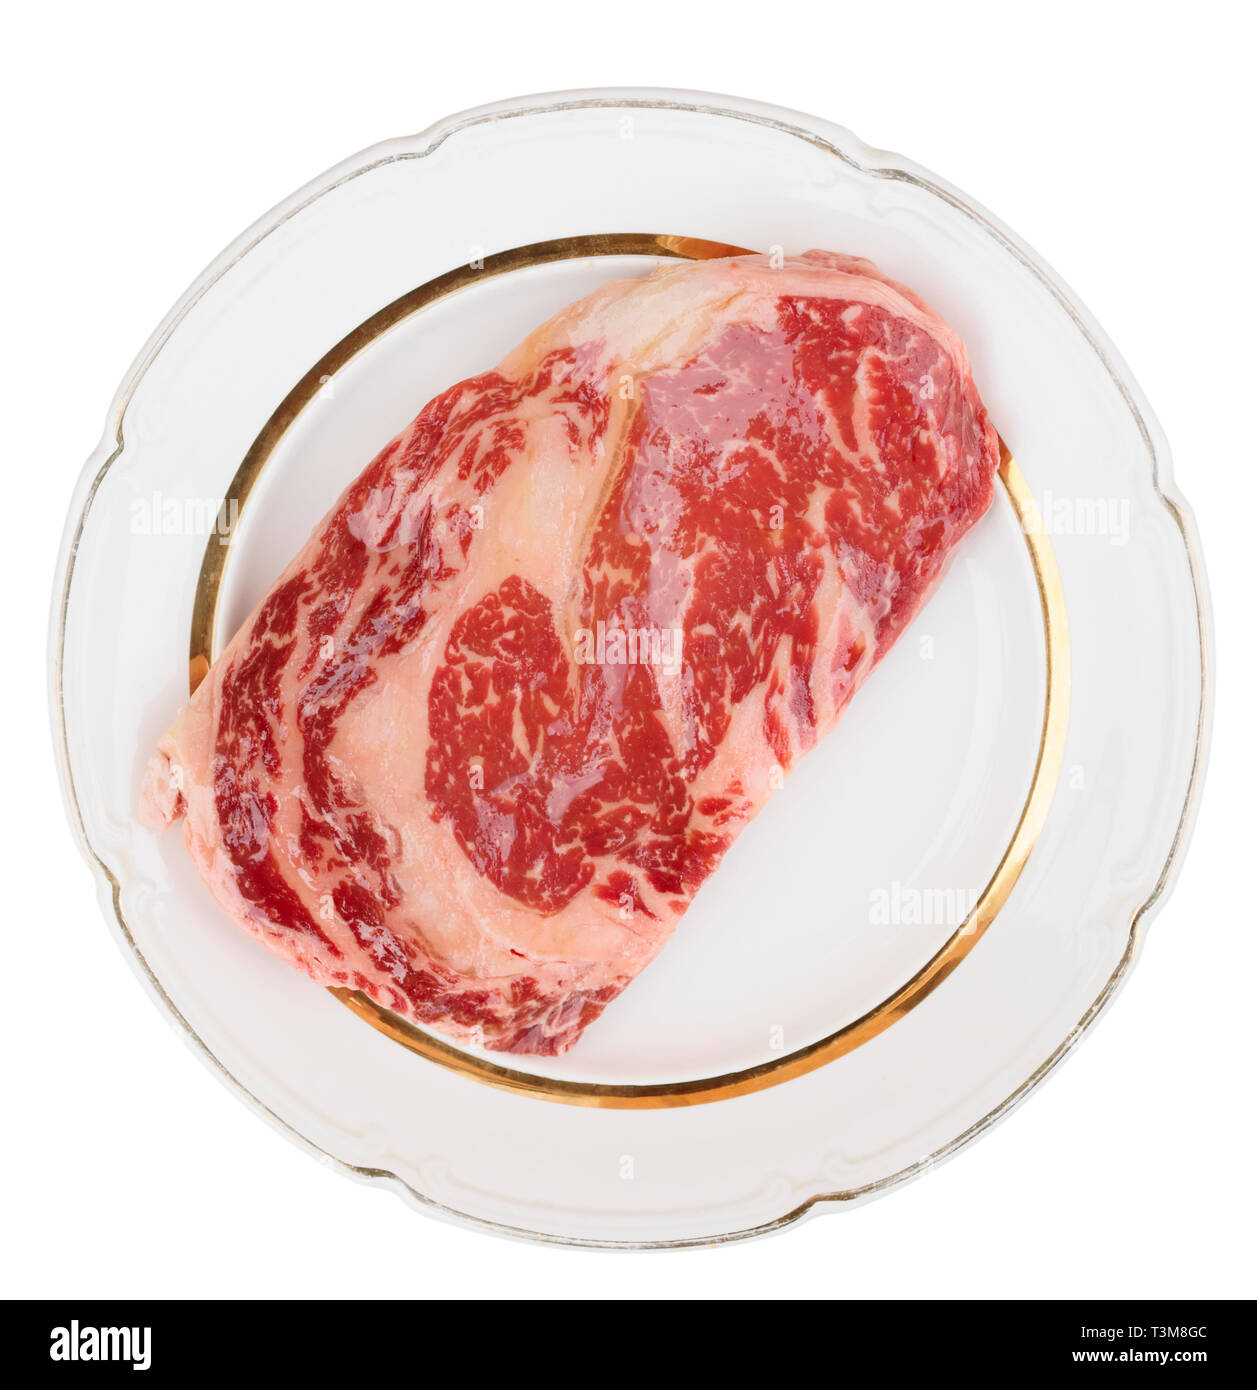 Qualité Premium Kobe Beef ribeye steak dans la plaque, isolated on white with clipping path Banque D'Images